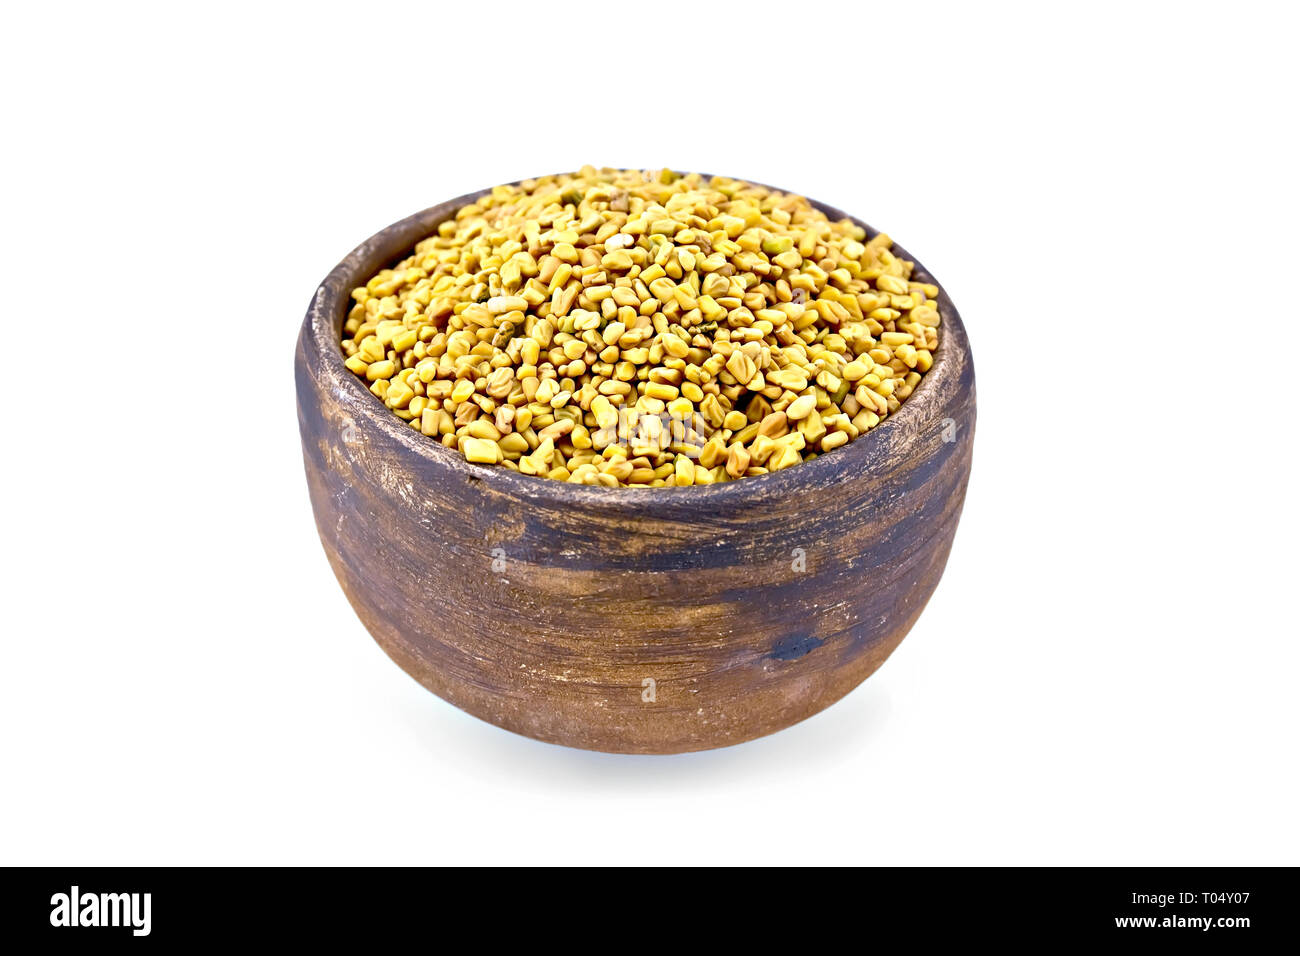 Fenugreek seeds in a clay bowl isolated on white background Stock Photo